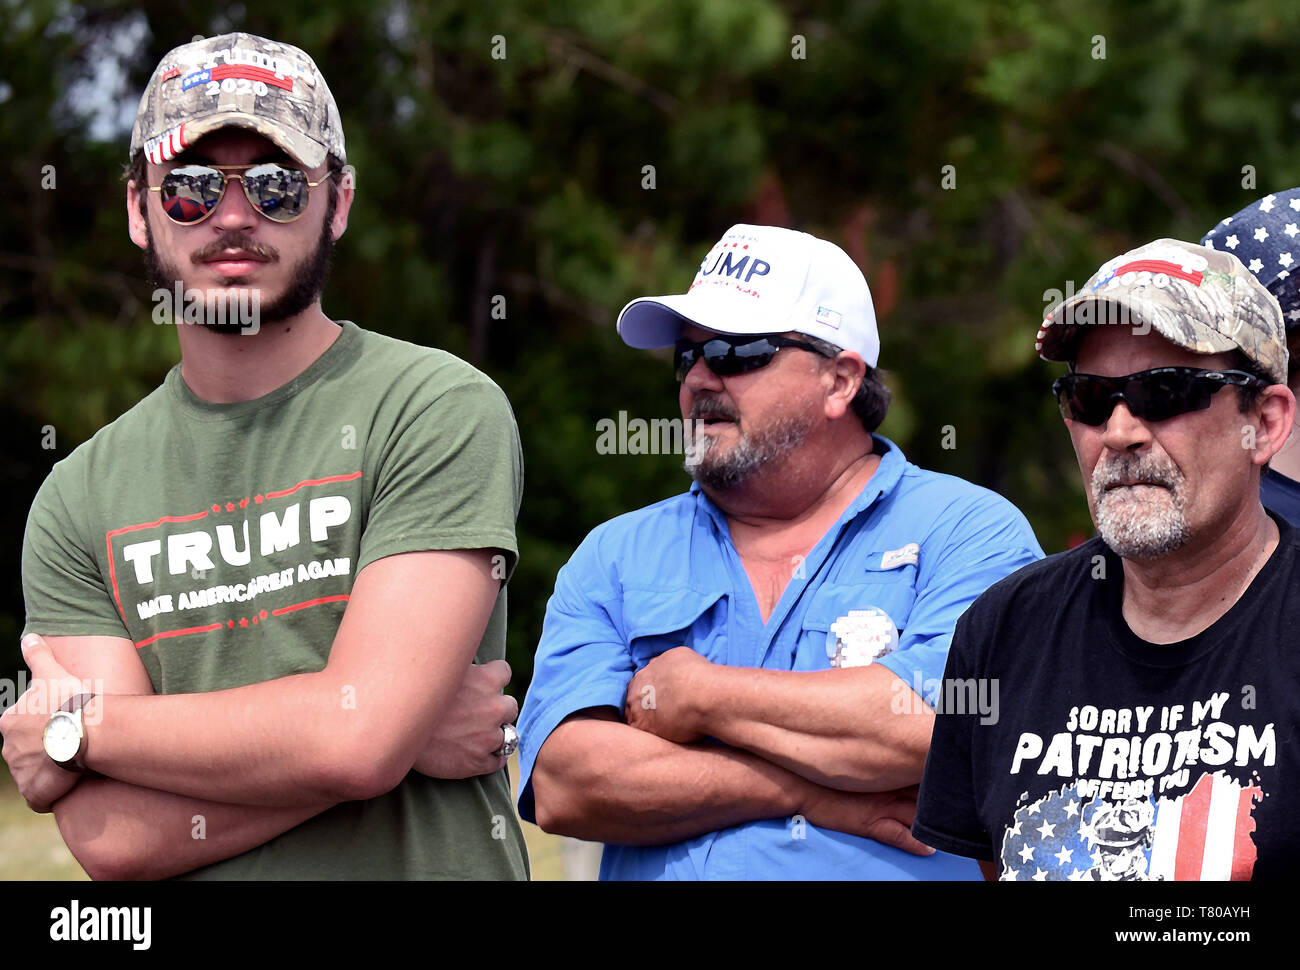 Panama City Beach, Florida, USA. 08th May, 2019. Supporters of U.S. President Donald Trump wait in line to hear the President speak at a Make America Great Again rally at the Aaron Bessant Park  Amphitheater on May 8, 2019 in Panama City Beach, Florida. (Paul Hennessy/Alamy) Credit: Paul Hennessy/Alamy Live News Stock Photo